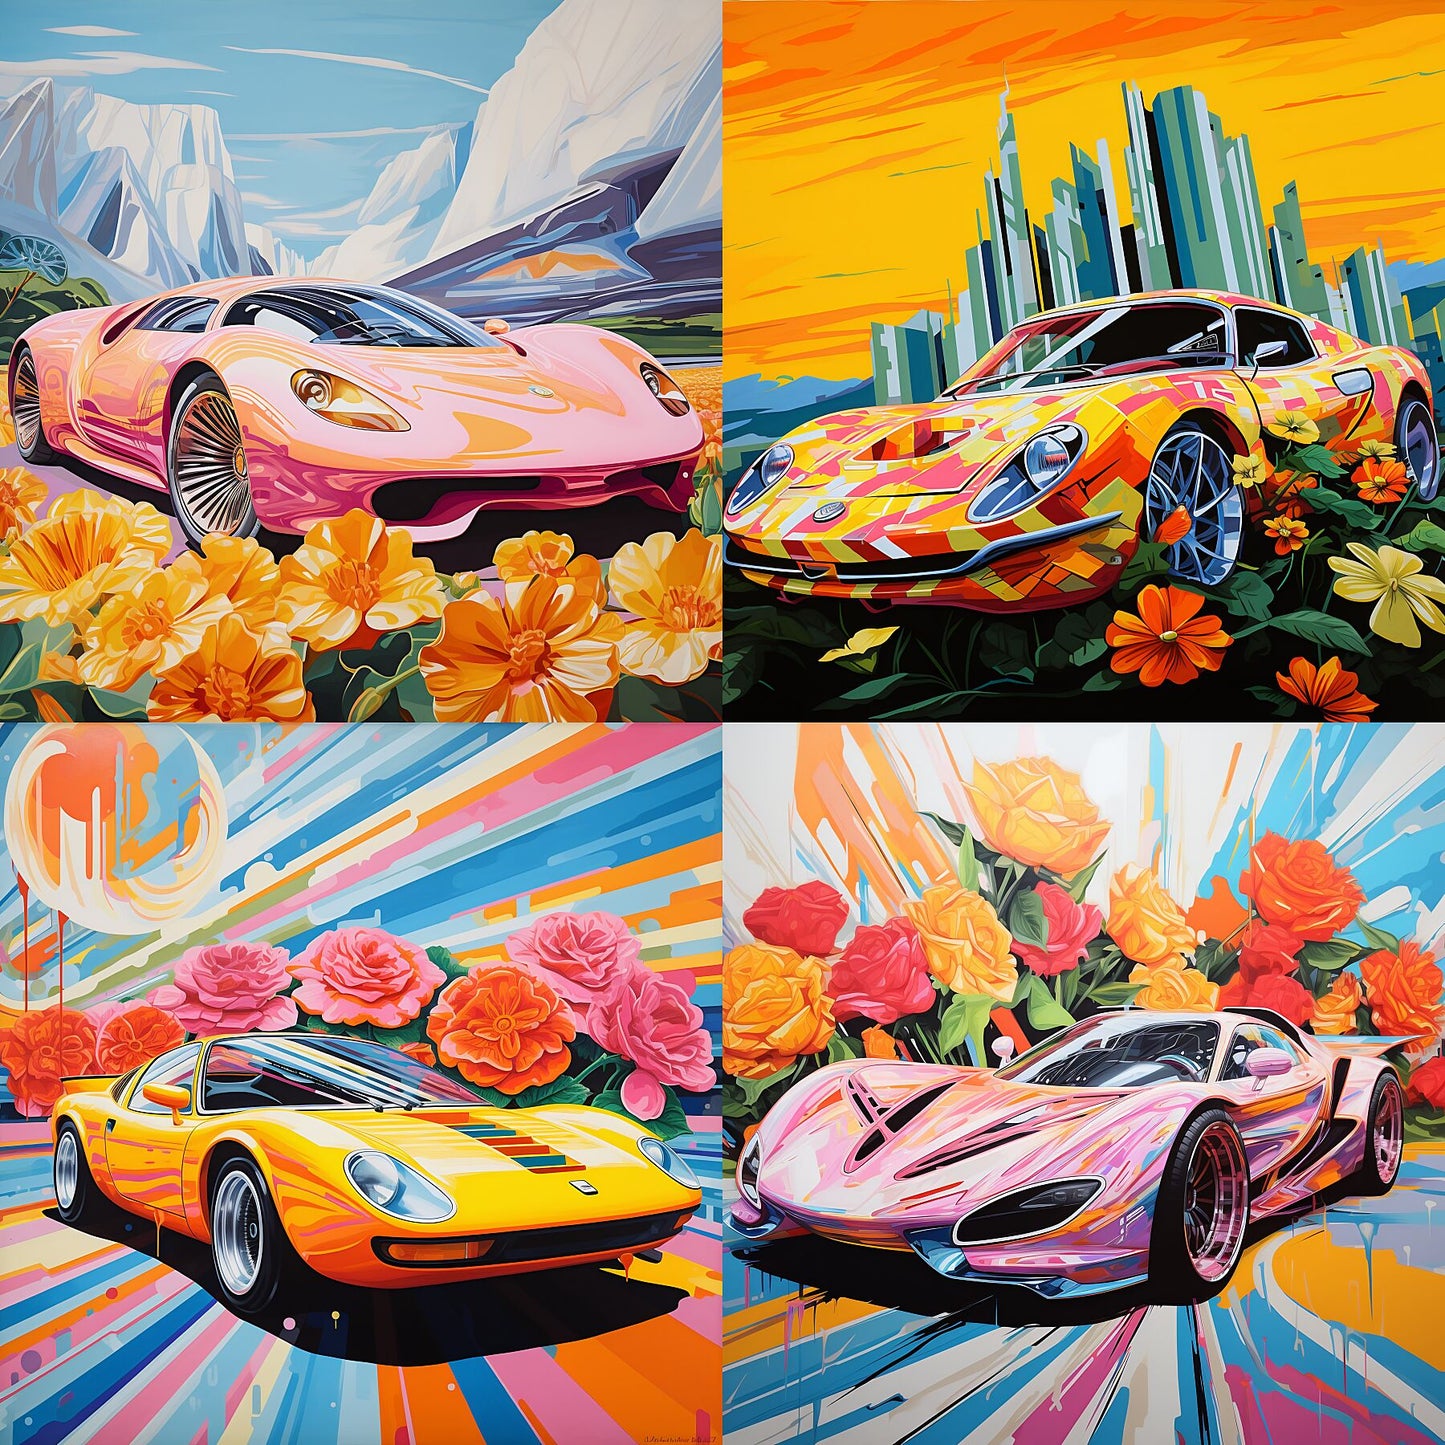 Futuristic sport car and giant flower painting inspired